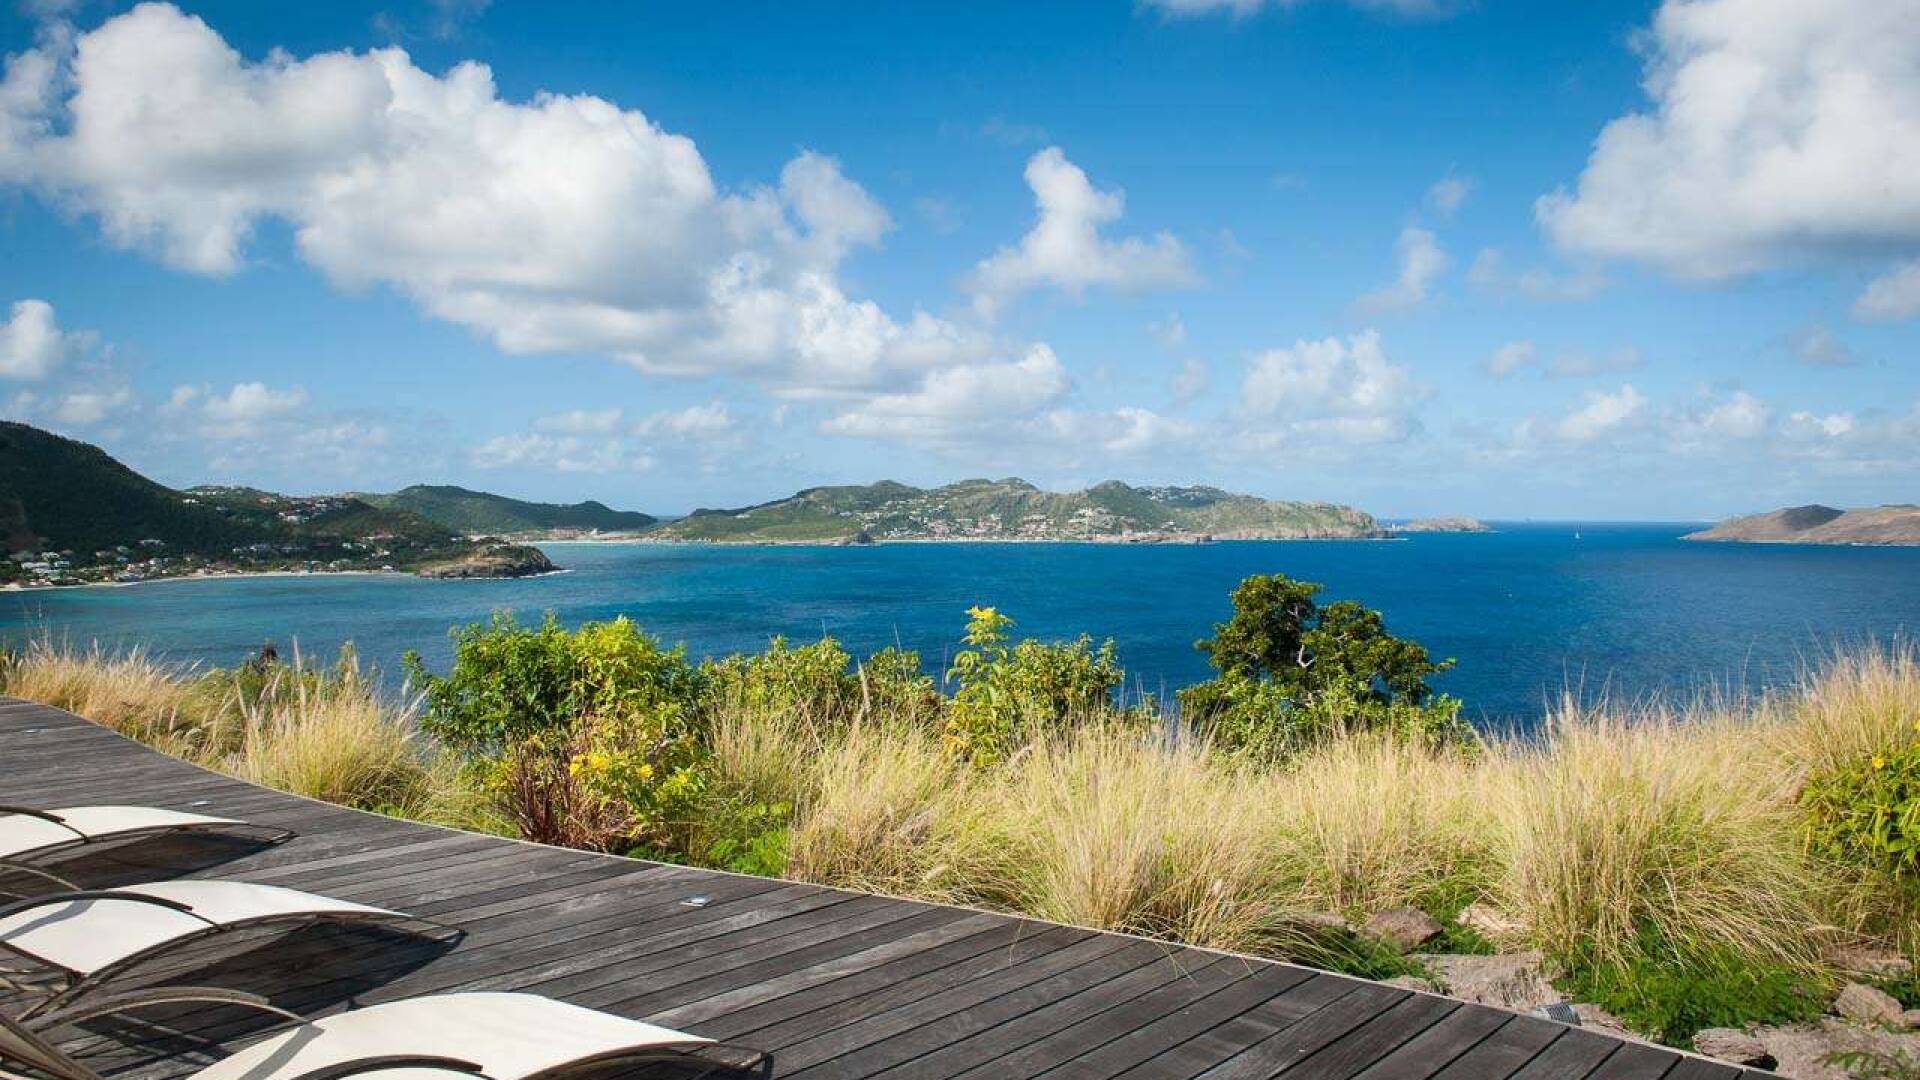 The view from WV PYR, Pointe Milou, St. Barthelemy